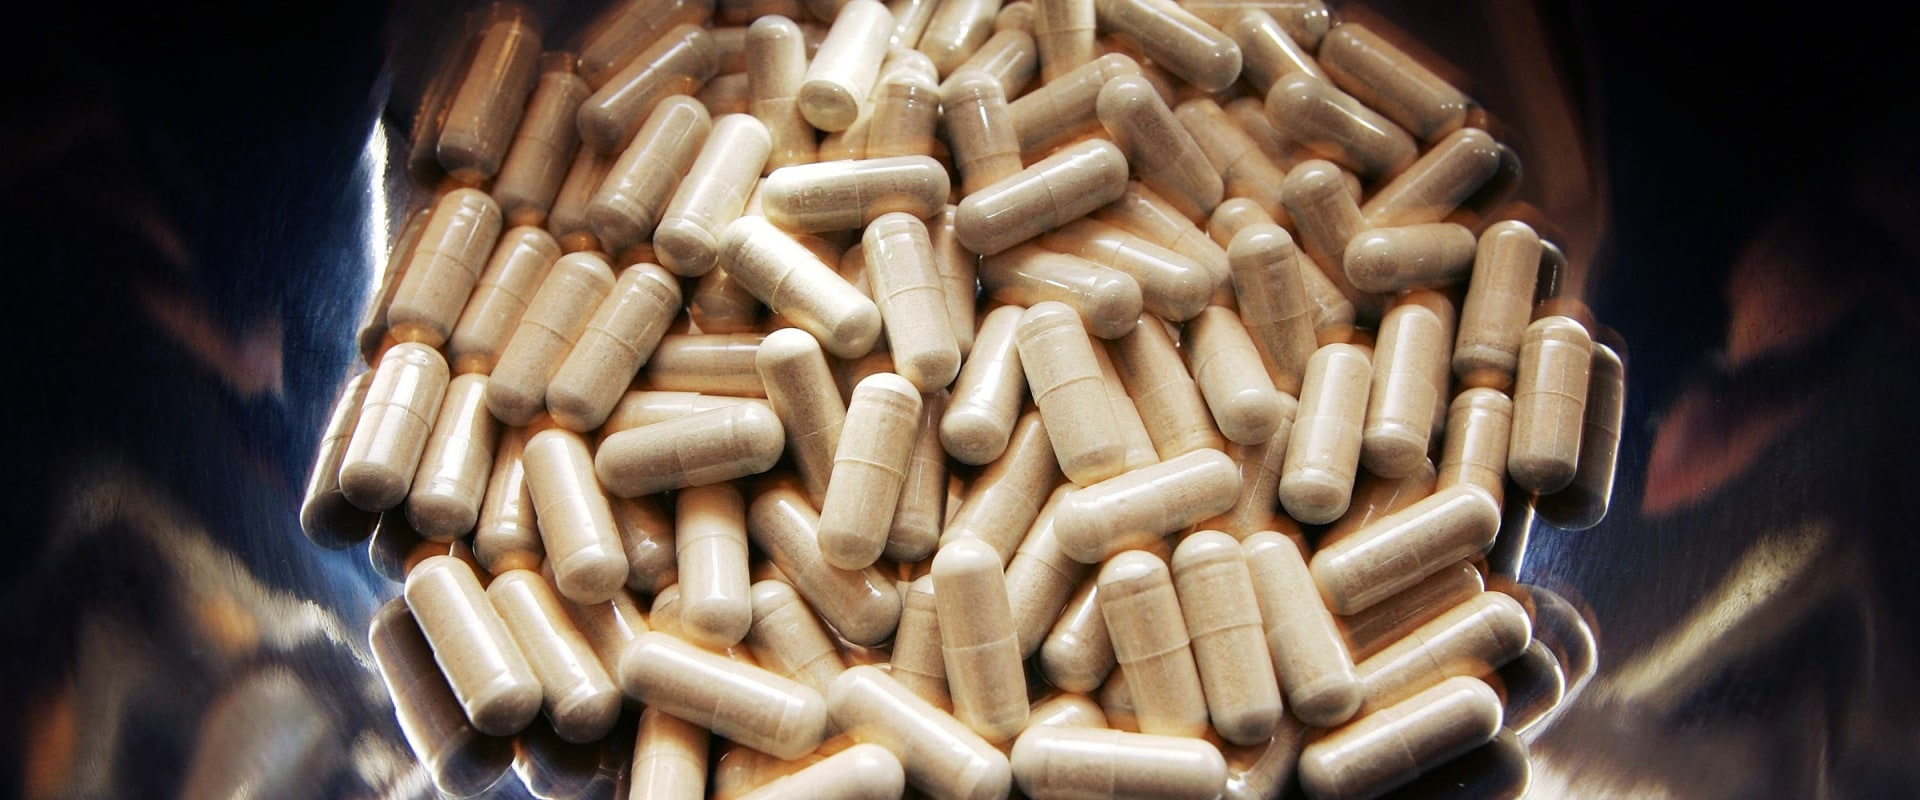 Do supplements contain toxins?